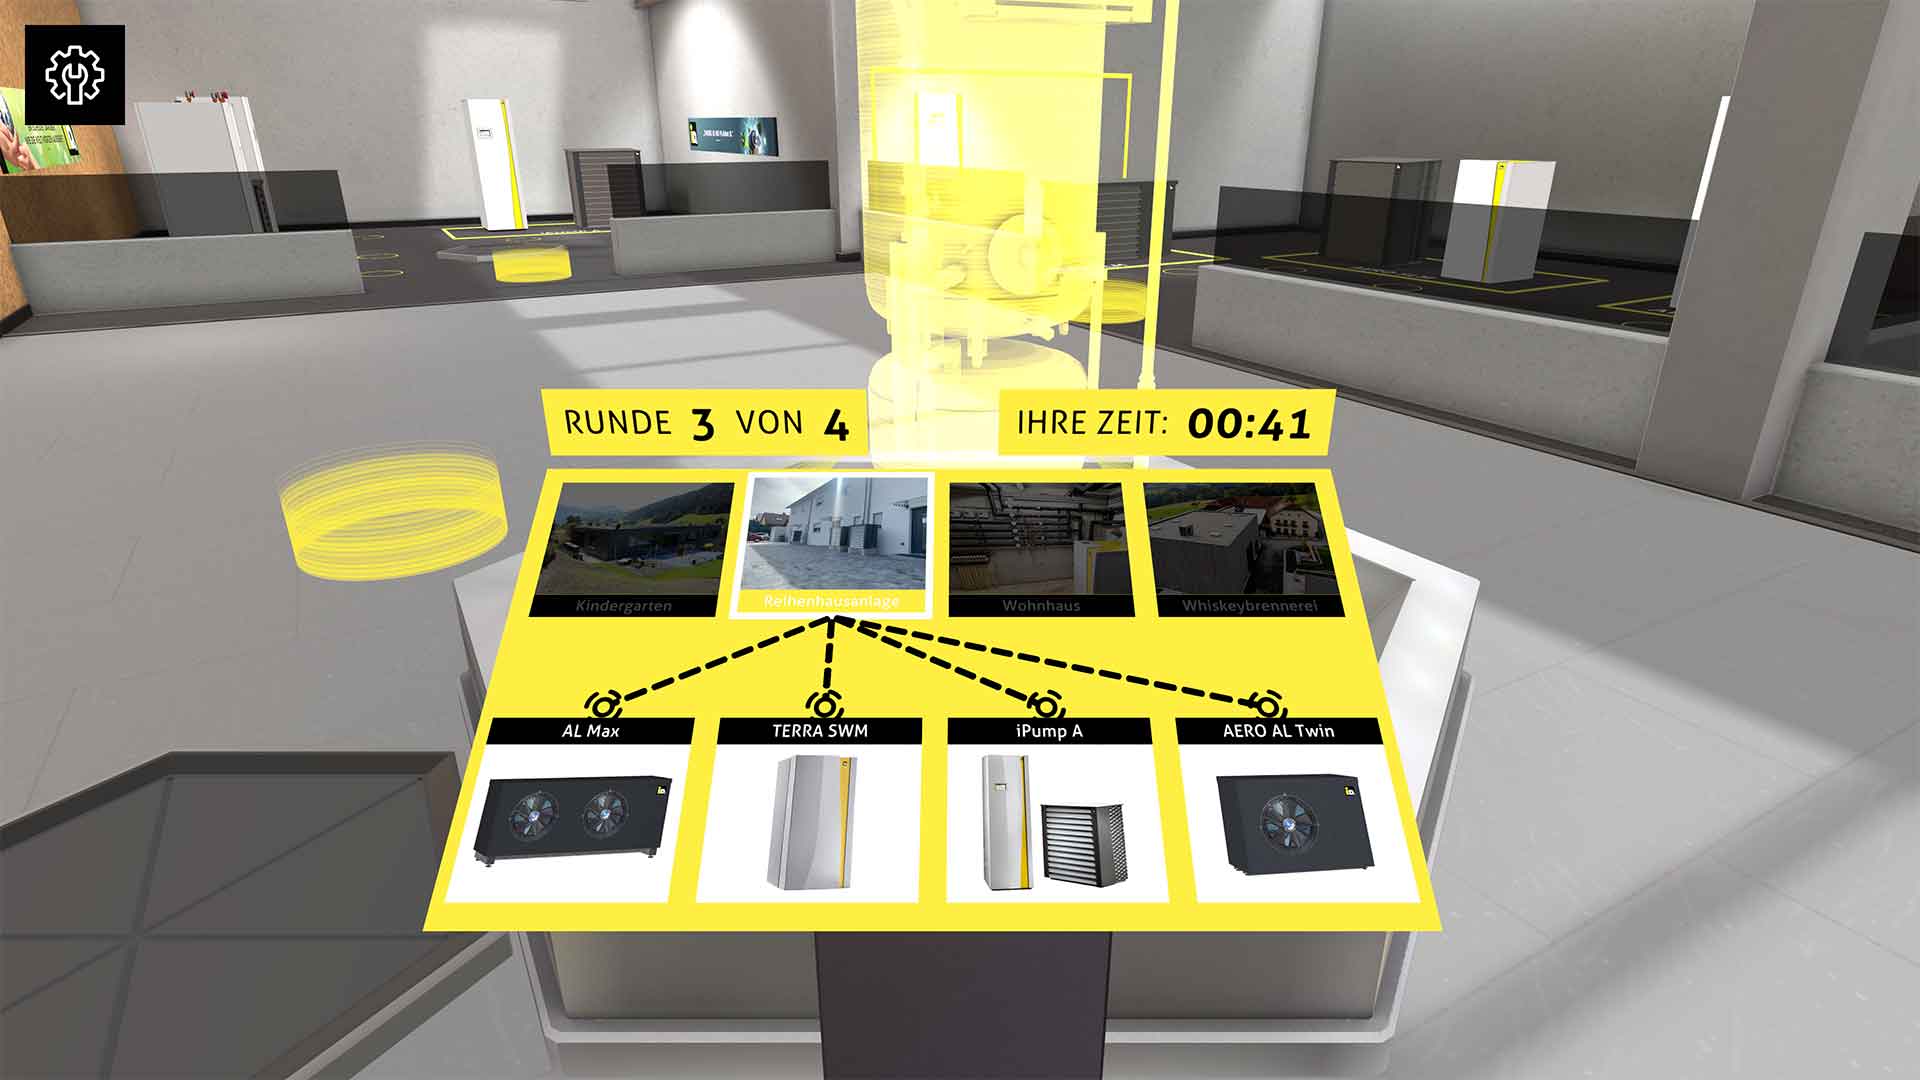 In the iDM virtual showroom, customers can move around the 3D space freely and interact with products or explore their features. 